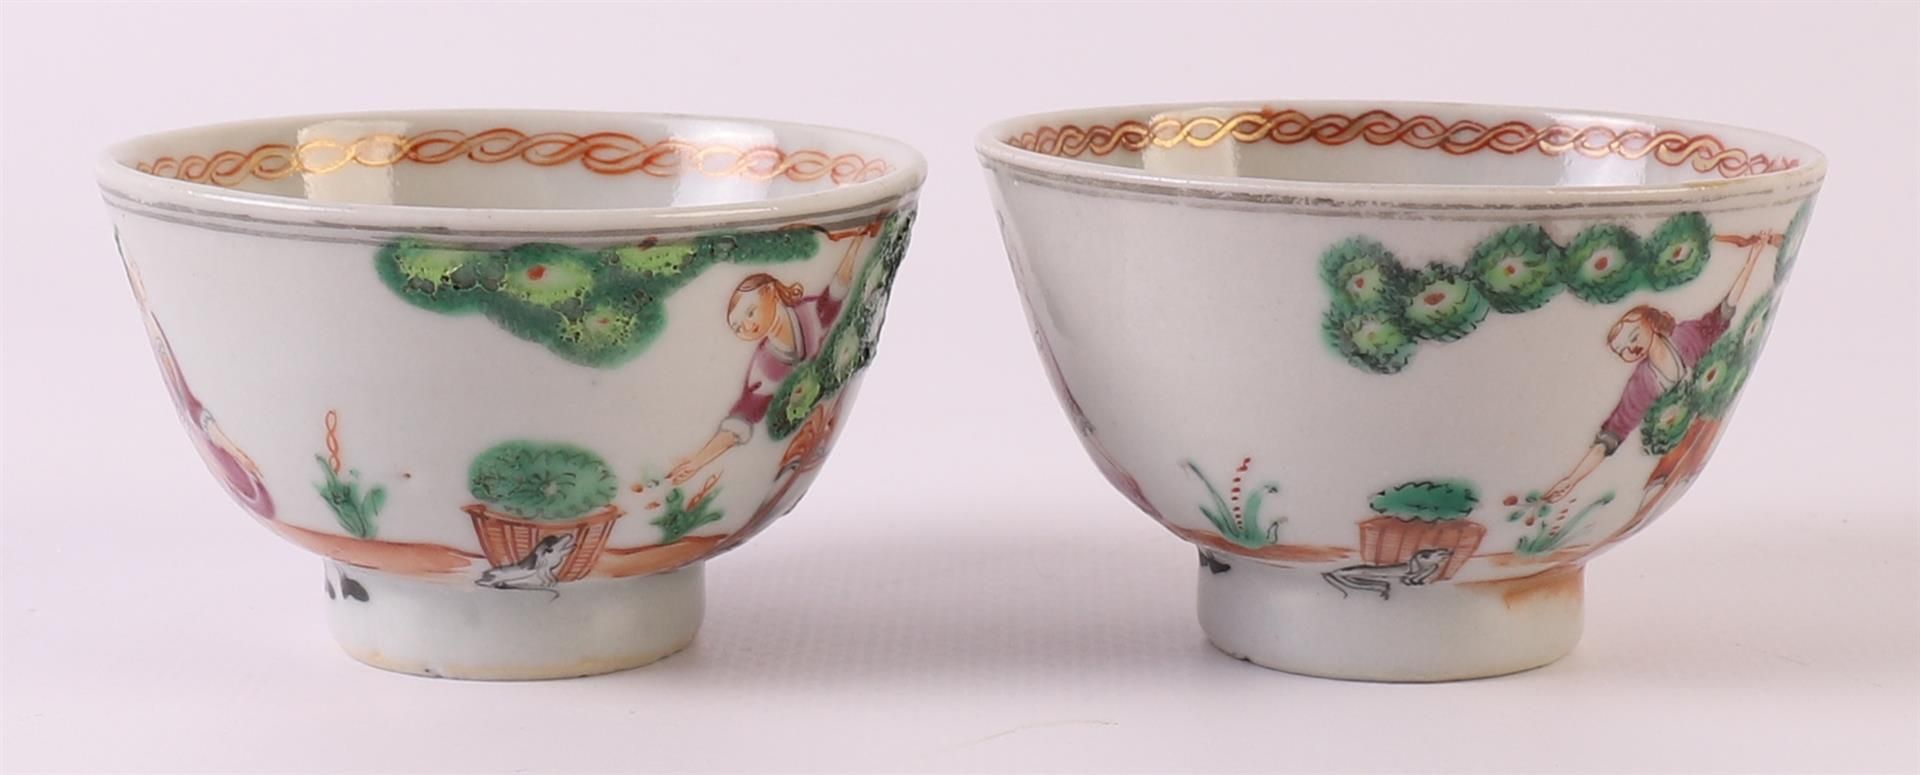 Four porcelain cups and accompanying saucers, Chine de Commande, China, Qianlong, 18th century. - Image 20 of 22